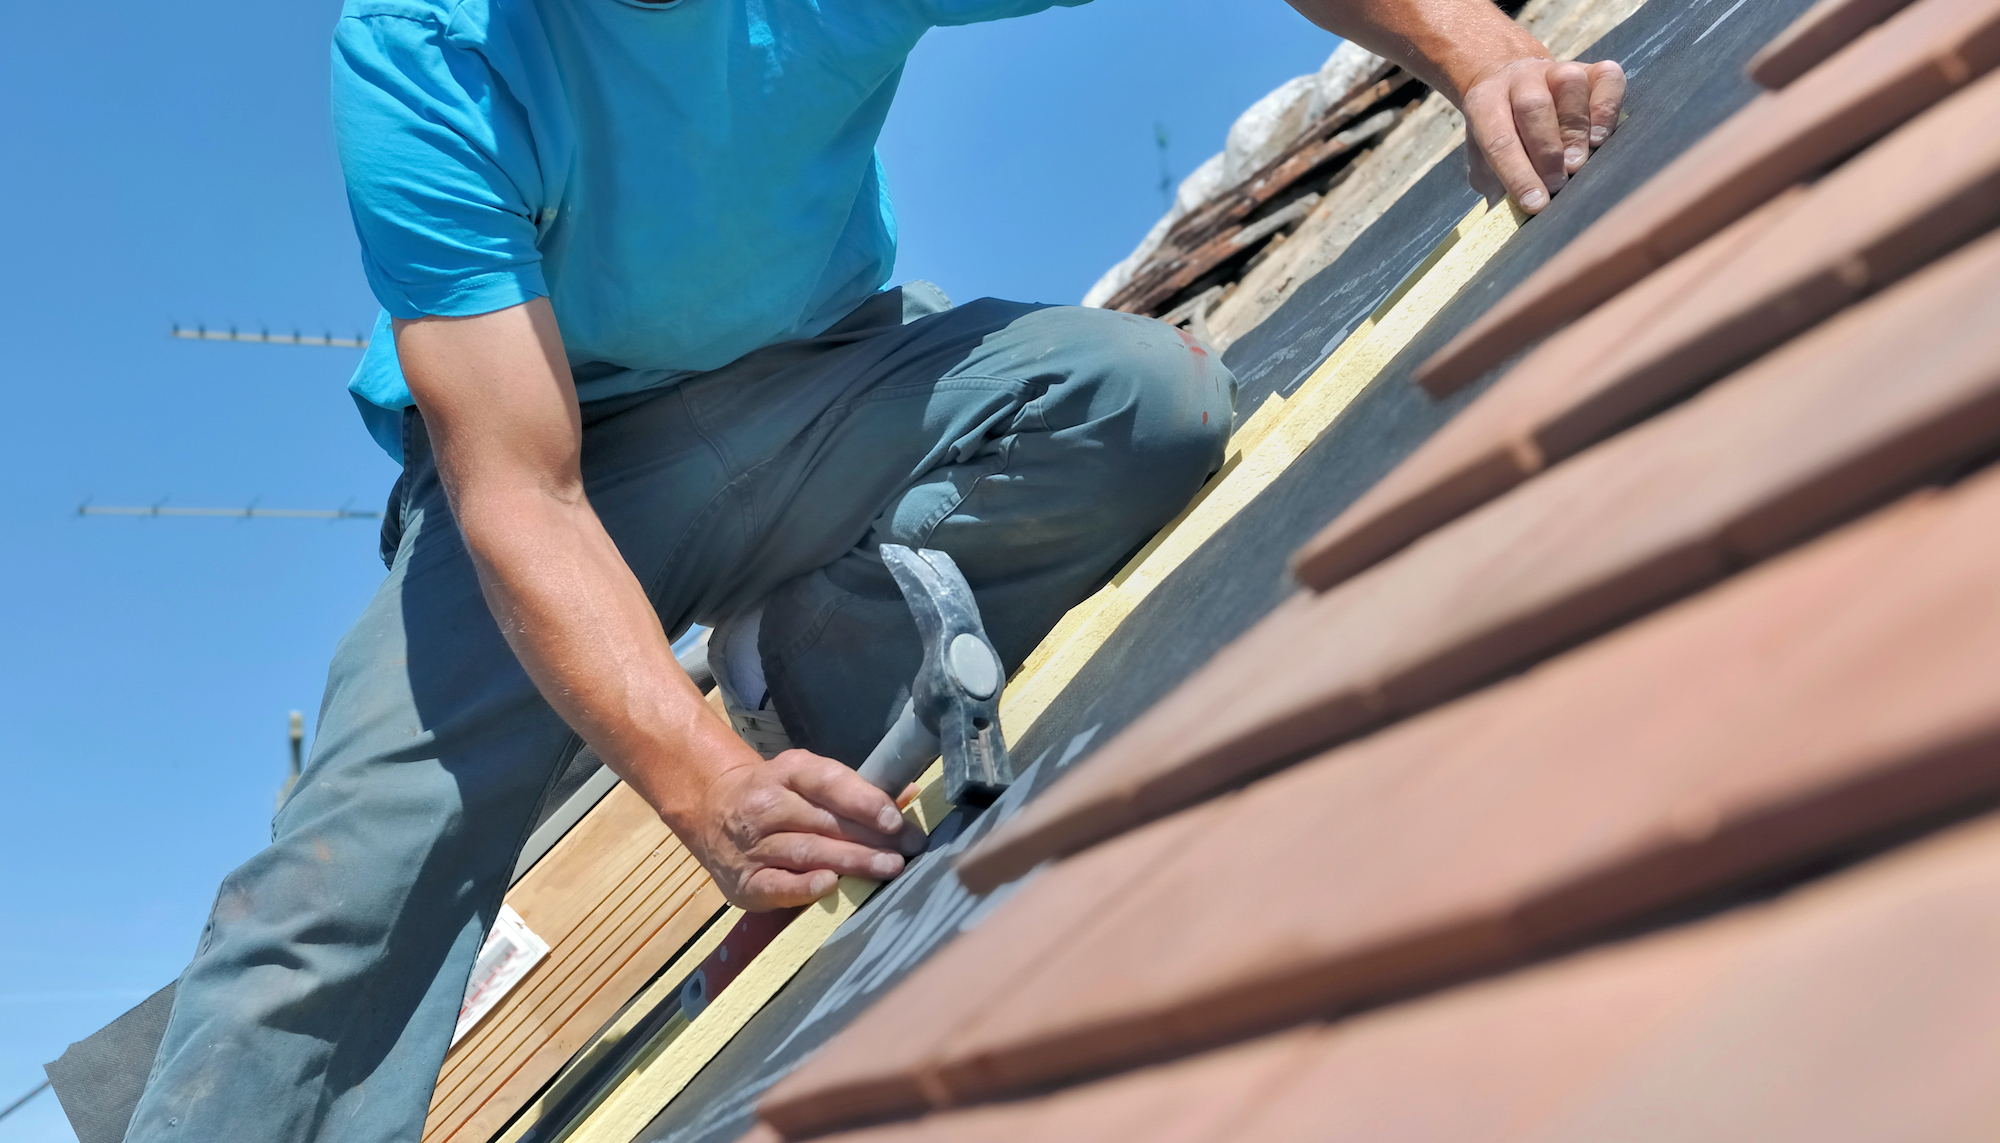 close on a worker holding a hammer and renoving a roof of a house